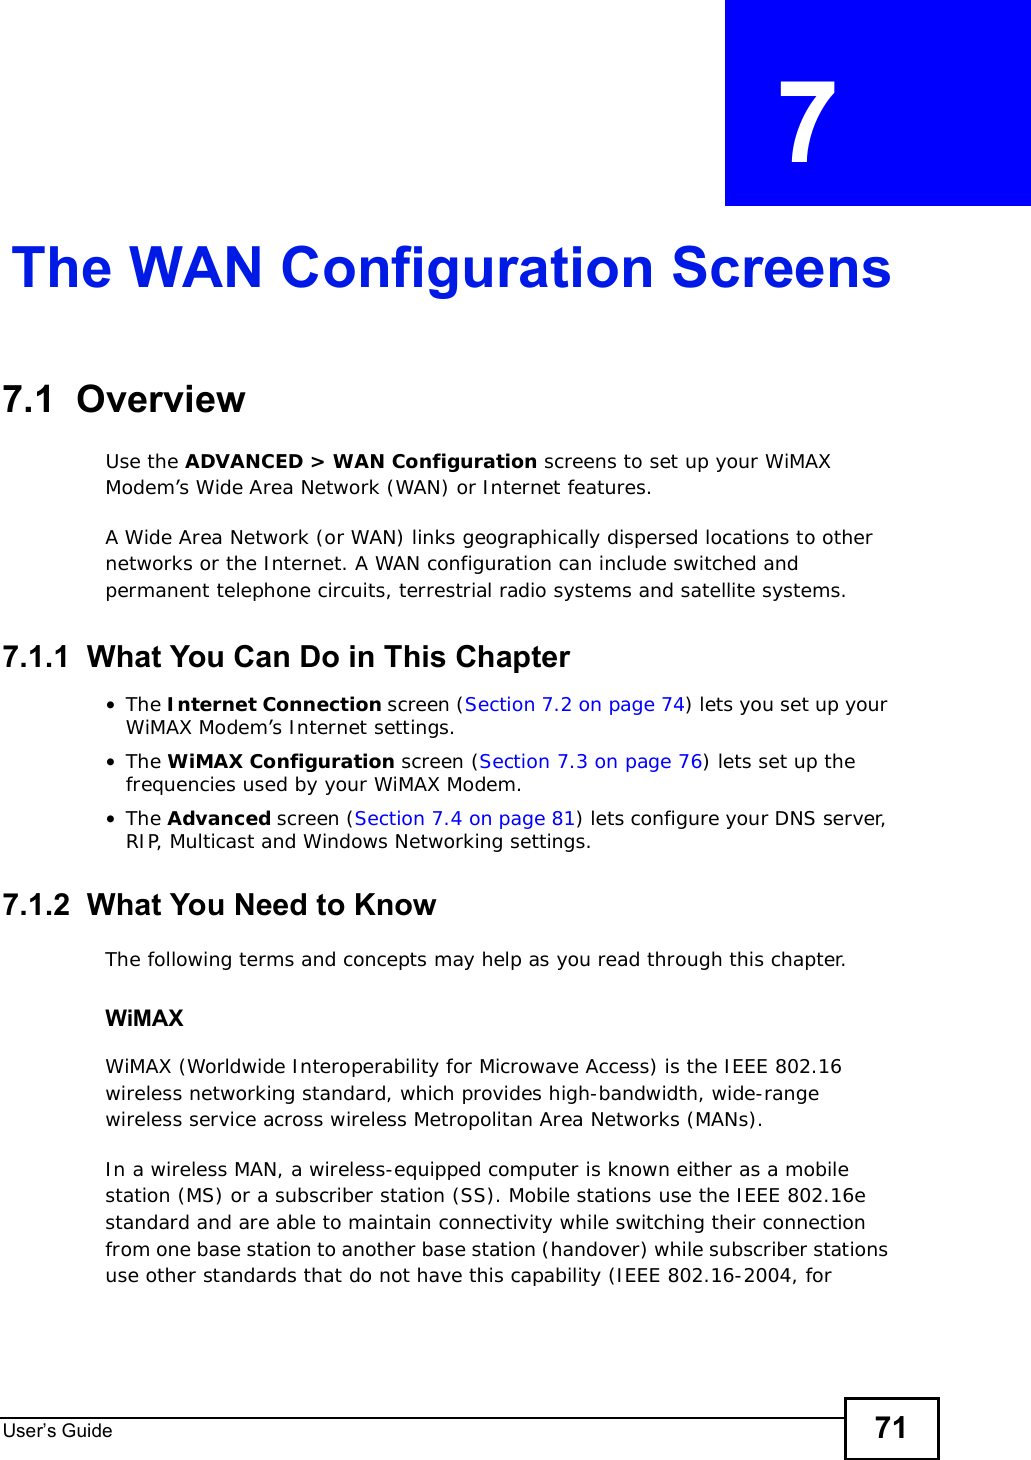 User s Guide 71CHAPTER  7 The WAN Configuration Screens7.1  Overview Use the ADVANCED &gt; WAN Configuration screens to set up your WiMAX Modem’s Wide Area Network (WAN) or Internet features.A Wide Area Network (or WAN) links geographically dispersed locations to other networks or the Internet. A WAN configuration can include switched and permanent telephone circuits, terrestrial radio systems and satellite systems.7.1.1  What You Can Do in This Chapter•The Internet Connection screen (Section 7.2 on page 74) lets you set up your WiMAX Modem’s Internet settings.•The WiMAX Configuration screen (Section 7.3 on page 76) lets set up the frequencies used by your WiMAX Modem.•The Advanced screen (Section 7.4 on page 81) lets configure your DNS server, RIP, Multicast and Windows Networking settings.7.1.2  What You Need to KnowThe following terms and concepts may help as you read through this chapter.WiMAX WiMAX (Worldwide Interoperability for Microwave Access) is the IEEE 802.16 wireless networking standard, which provides high-bandwidth, wide-range wireless service across wireless Metropolitan Area Networks (MANs).In a wireless MAN, a wireless-equipped computer is known either as a mobile station (MS) or a subscriber station (SS). Mobile stations use the IEEE 802.16e standard and are able to maintain connectivity while switching their connection from one base station to another base station (handover) while subscriber stations use other standards that do not have this capability (IEEE 802.16-2004, for 